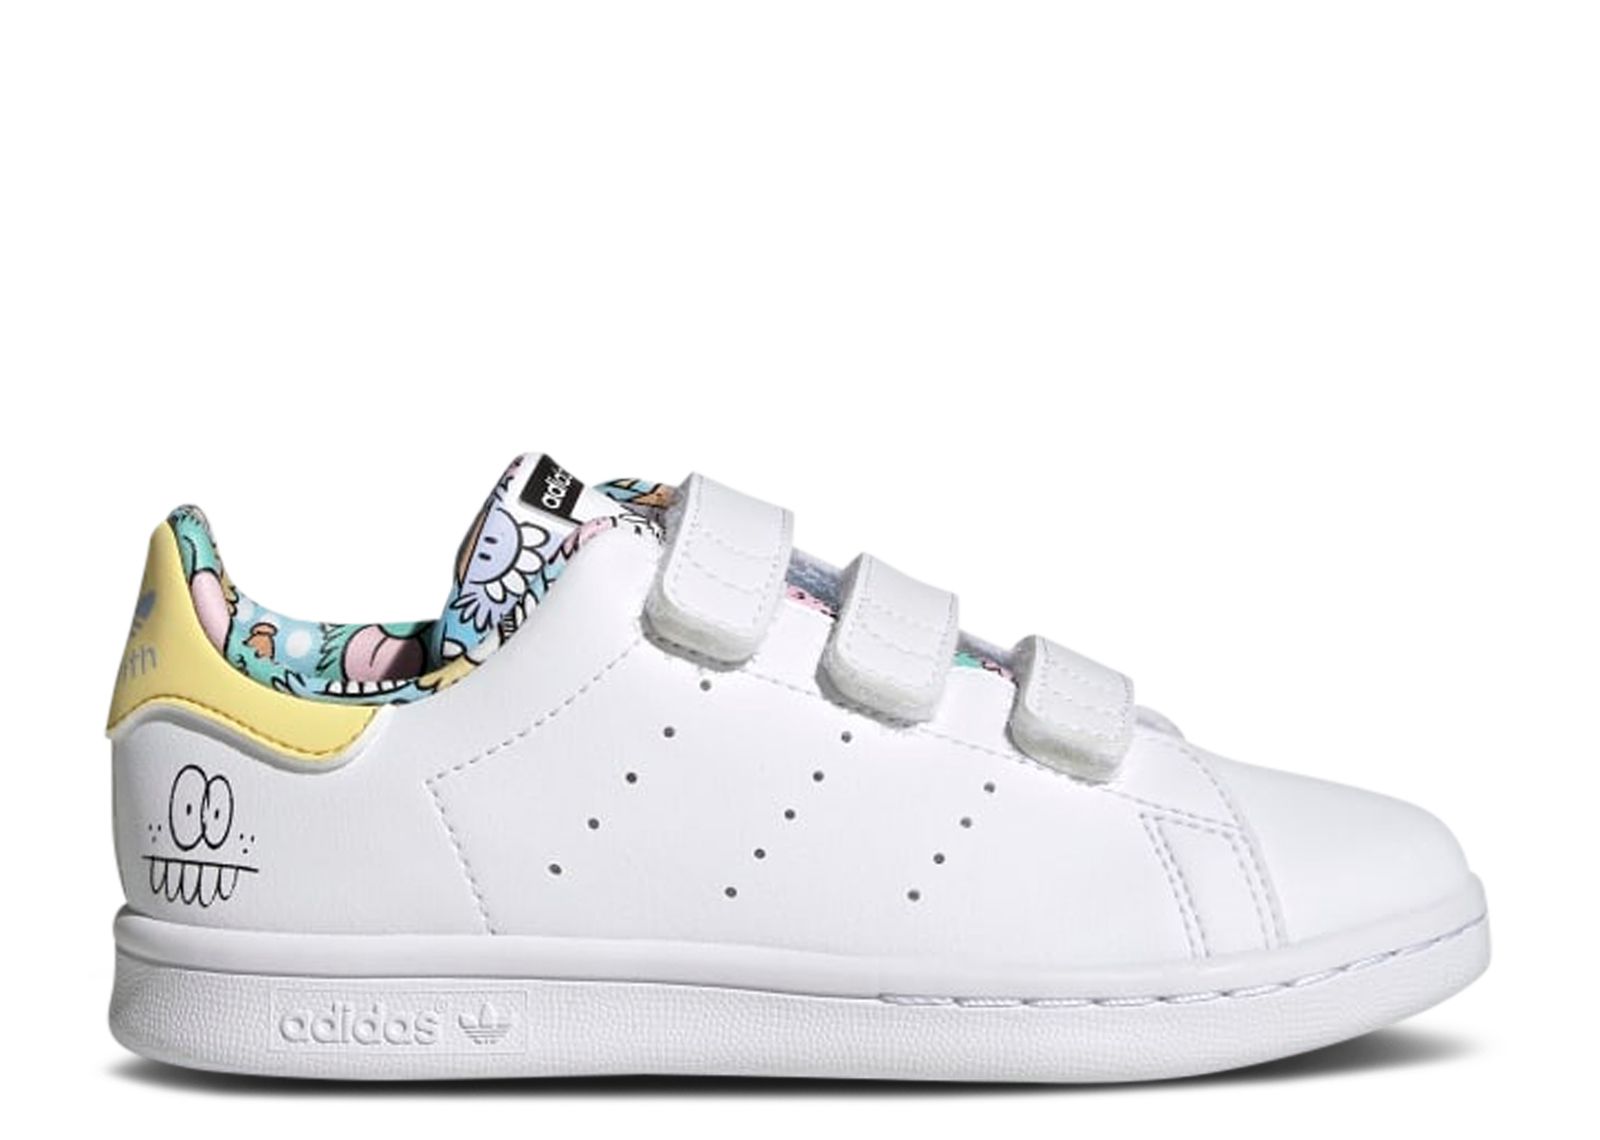 adidas x kevin lyons stan smith shoes